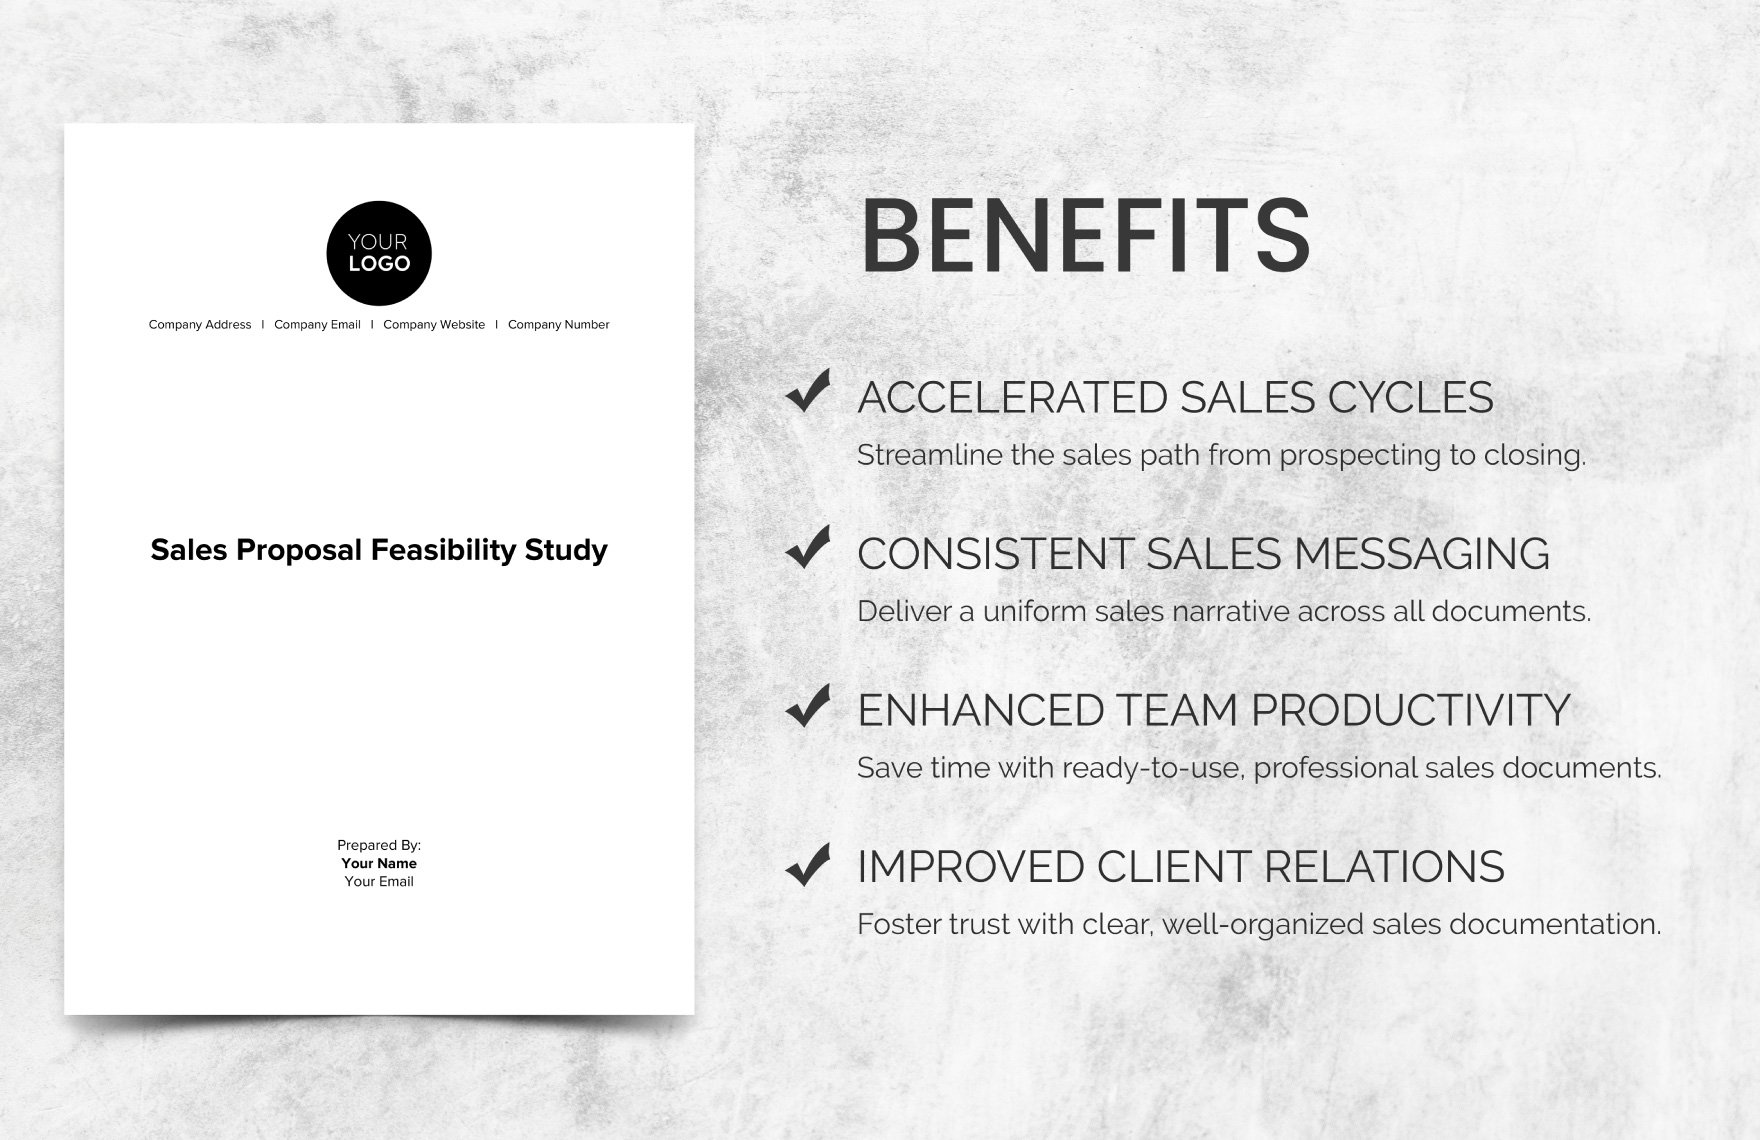 Sales Proposal Feasibility Study Template